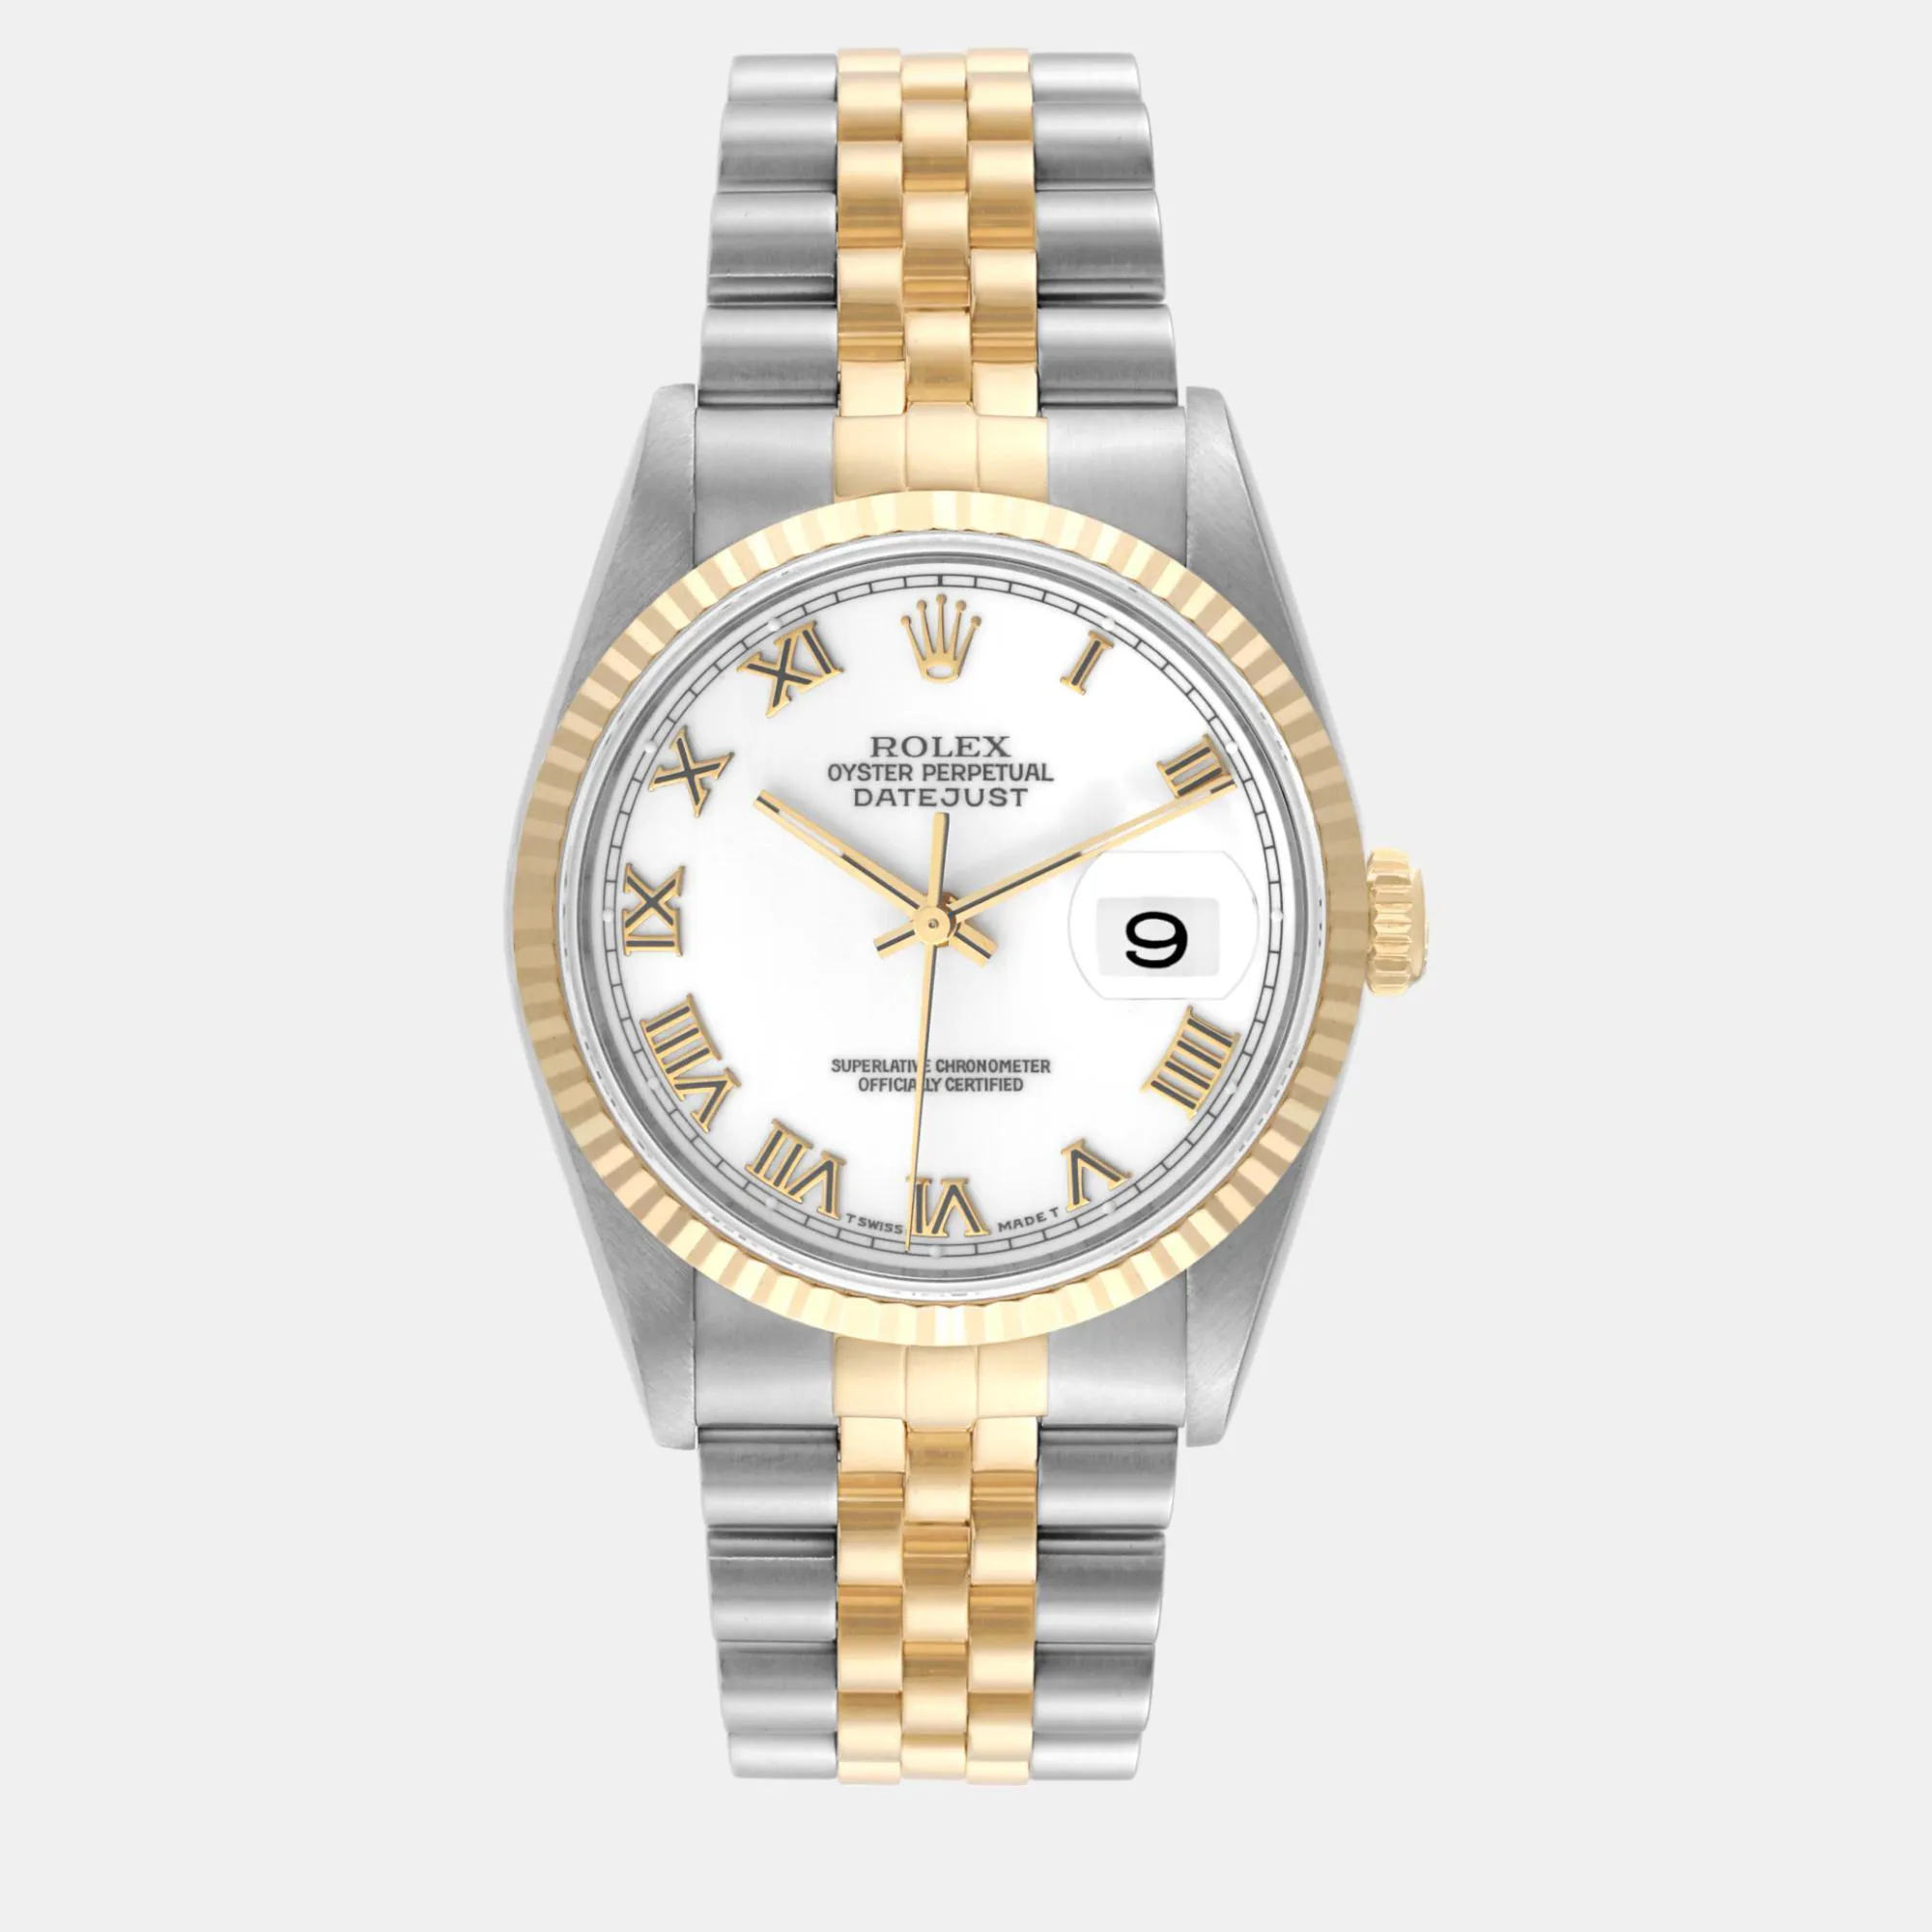 Rolex Datejust 36mm Yellow gold and stainless steel